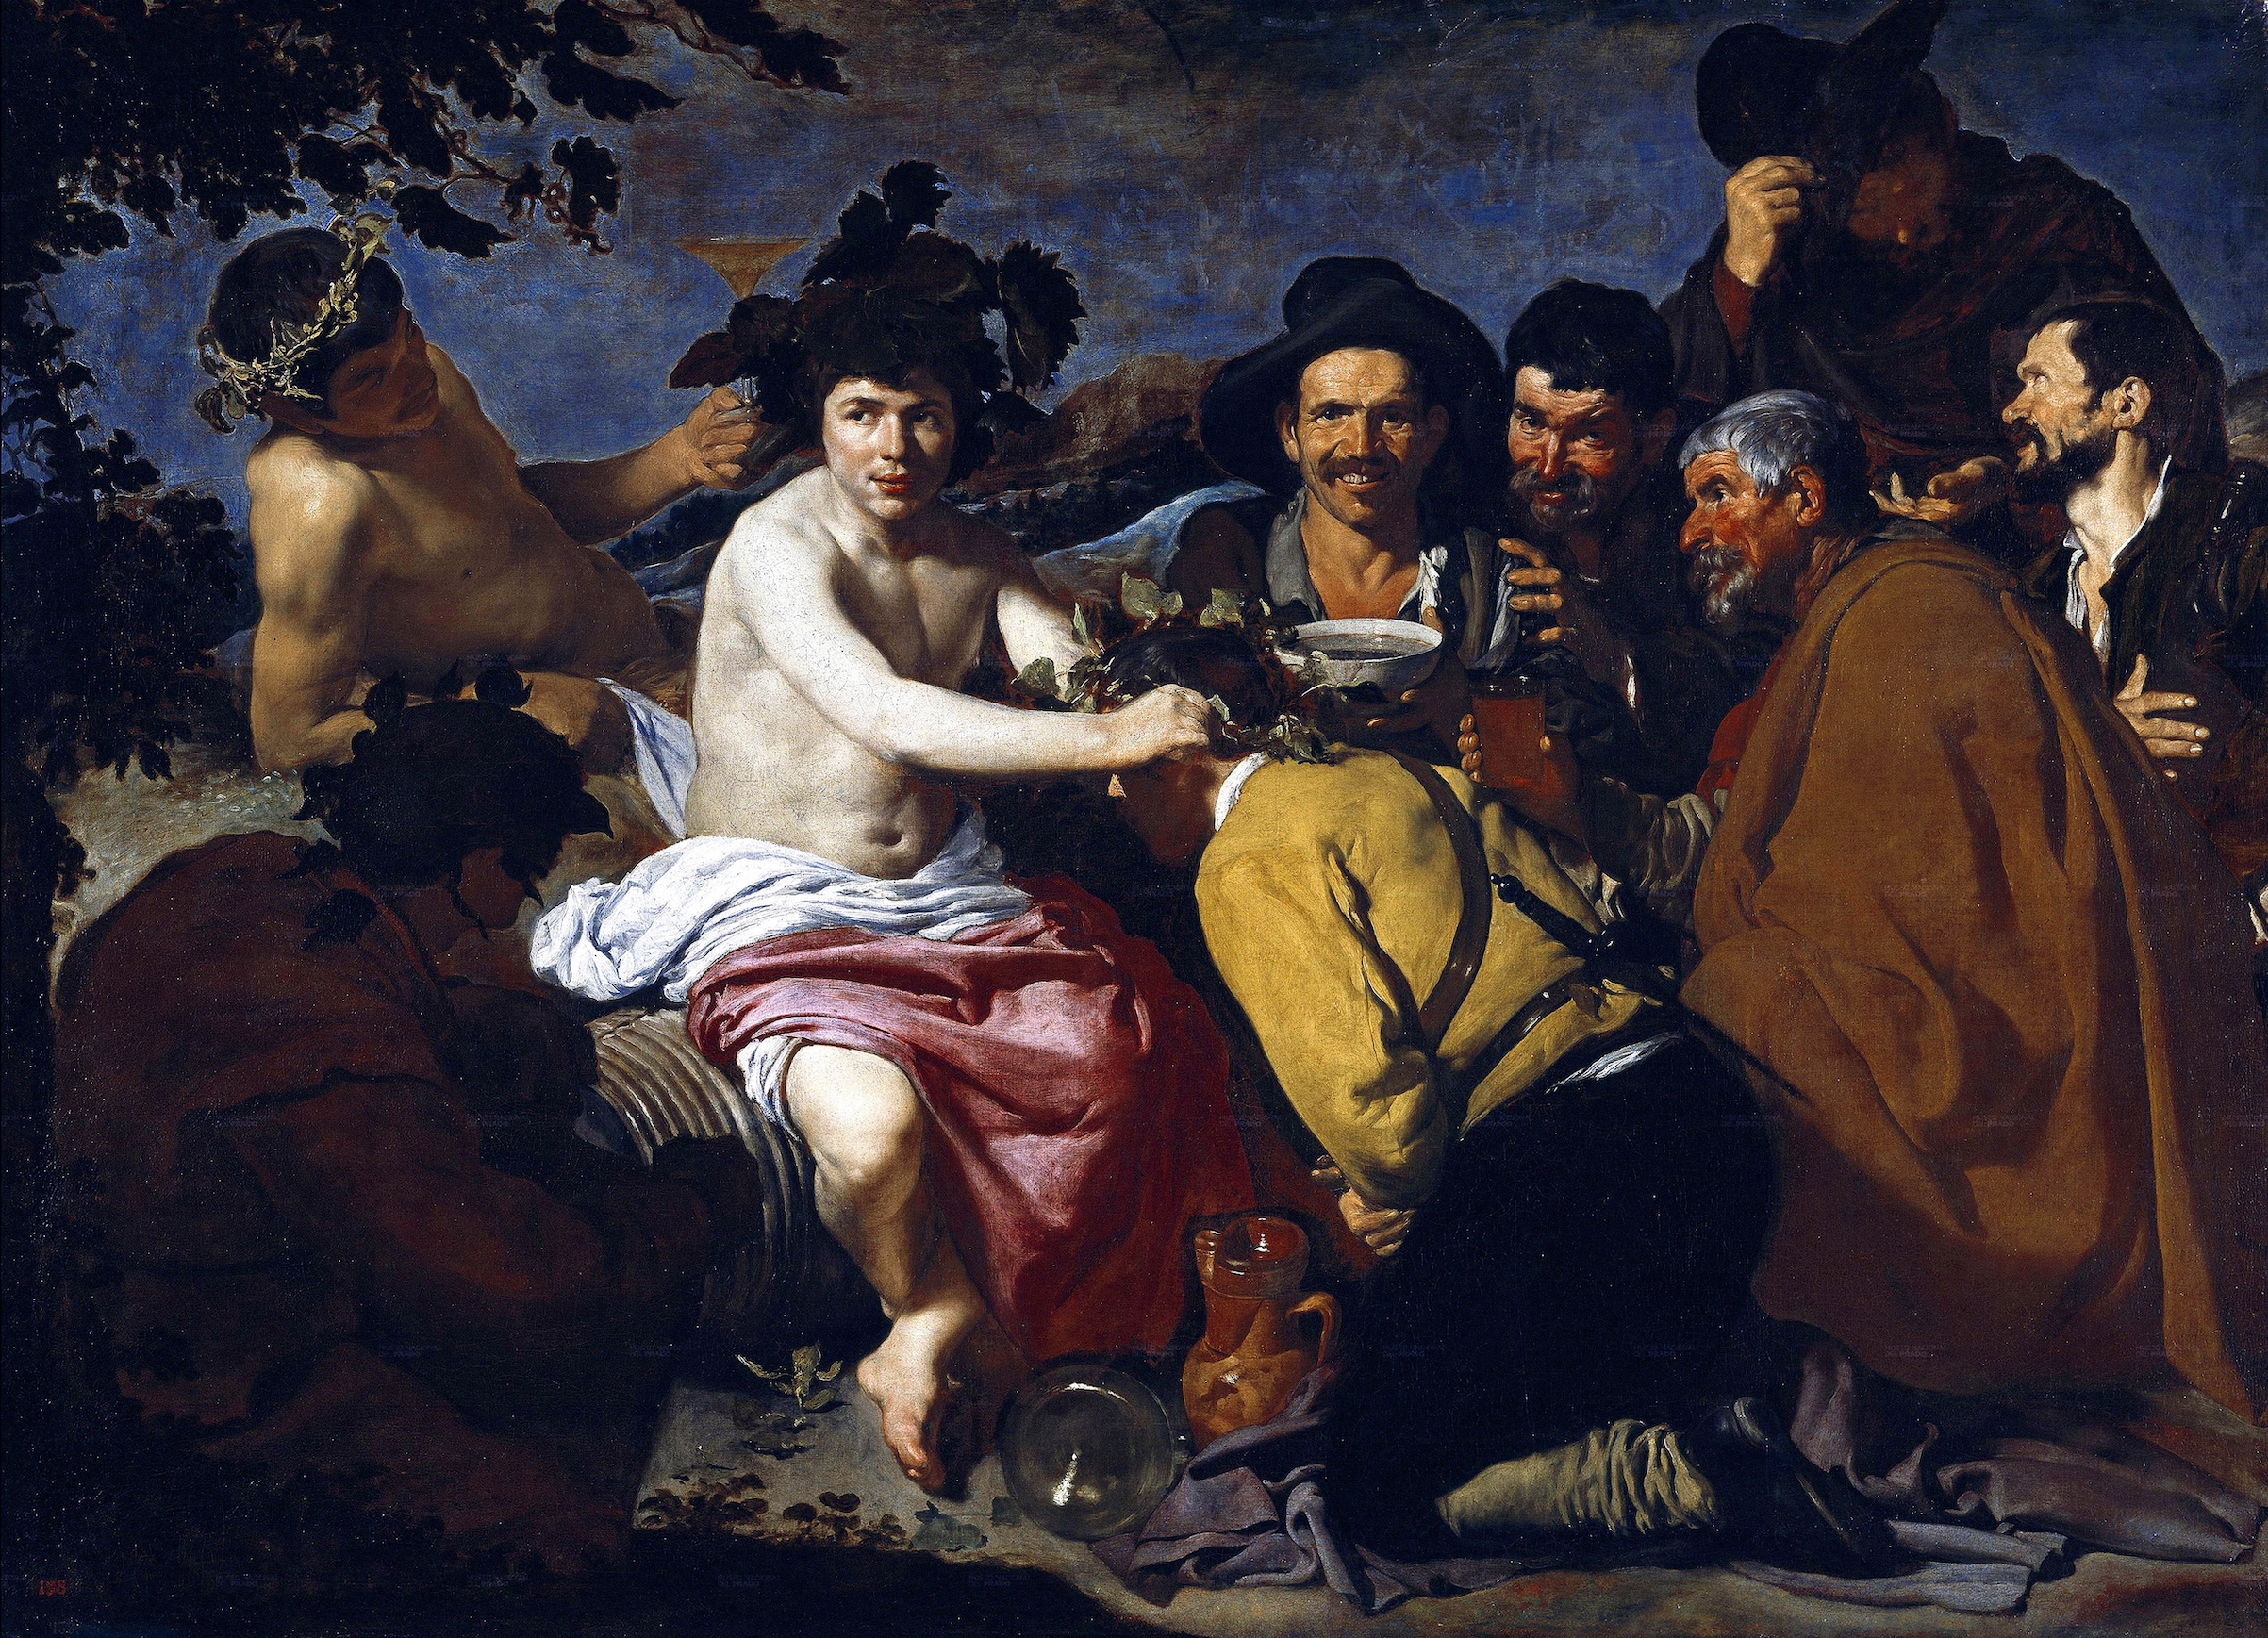 Diego Velazquez's 'The Triumph of Bacchus, or the Drunkards' (1628-29) (Universal History Archive/Getty Images)